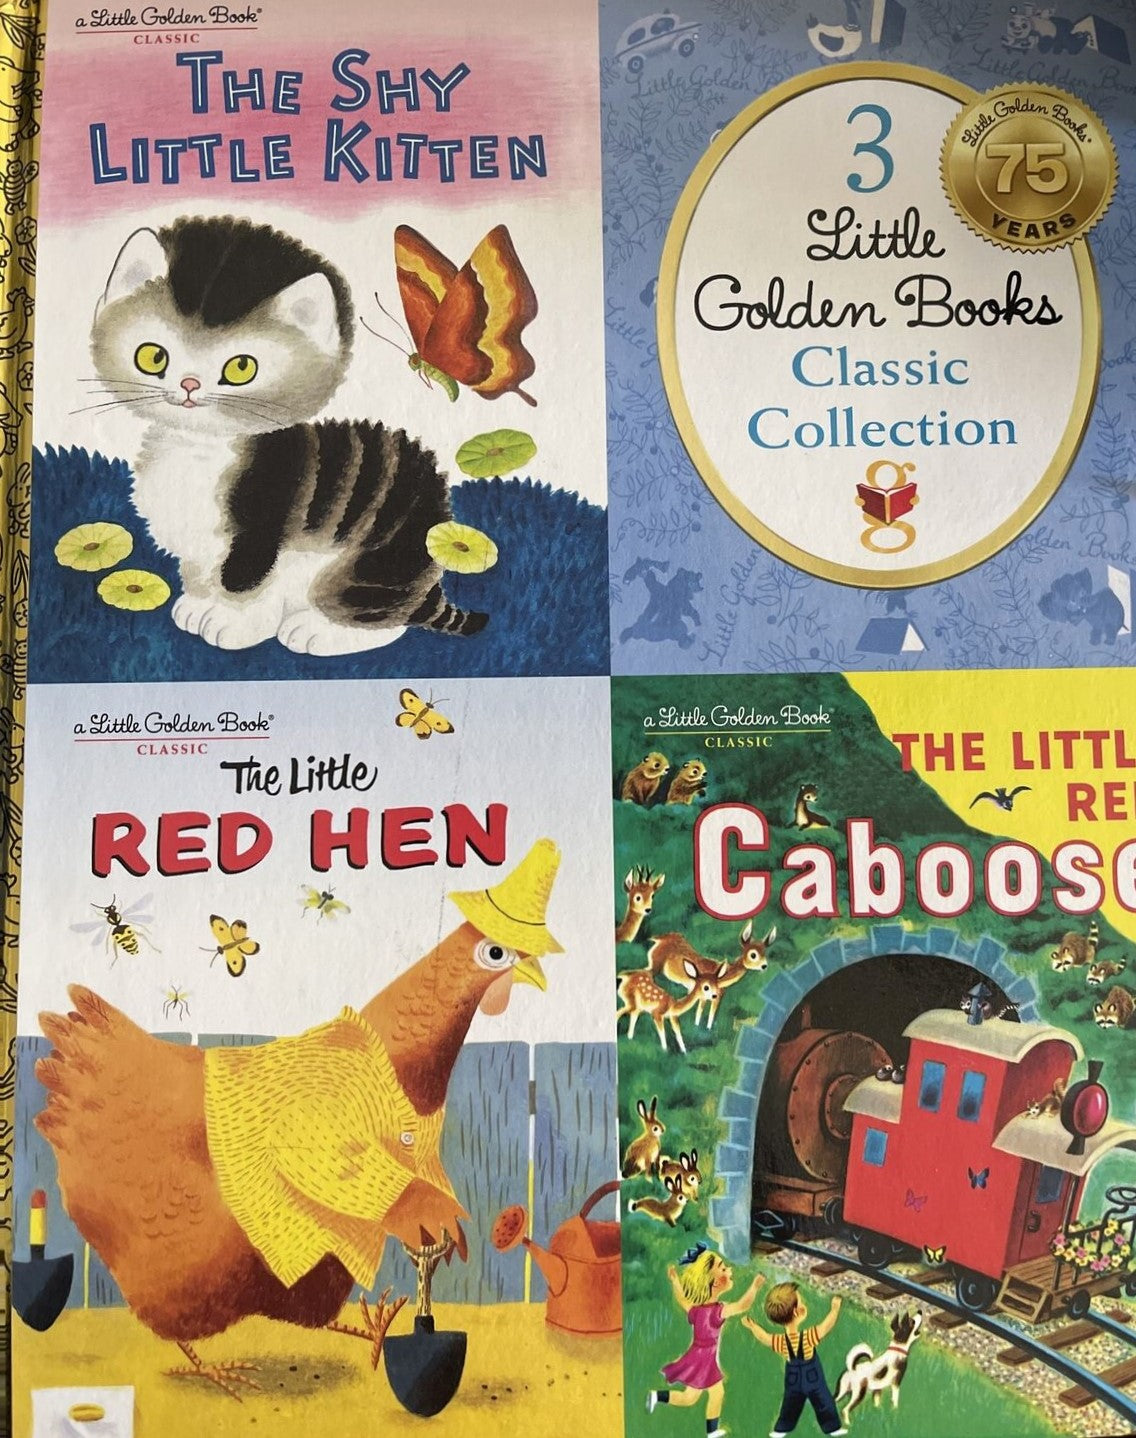 Little Golden Book : The Shy Little Kitten, The Little Red Hen and The Little Red Caboose with The Shy Little Kitten Plush Toy